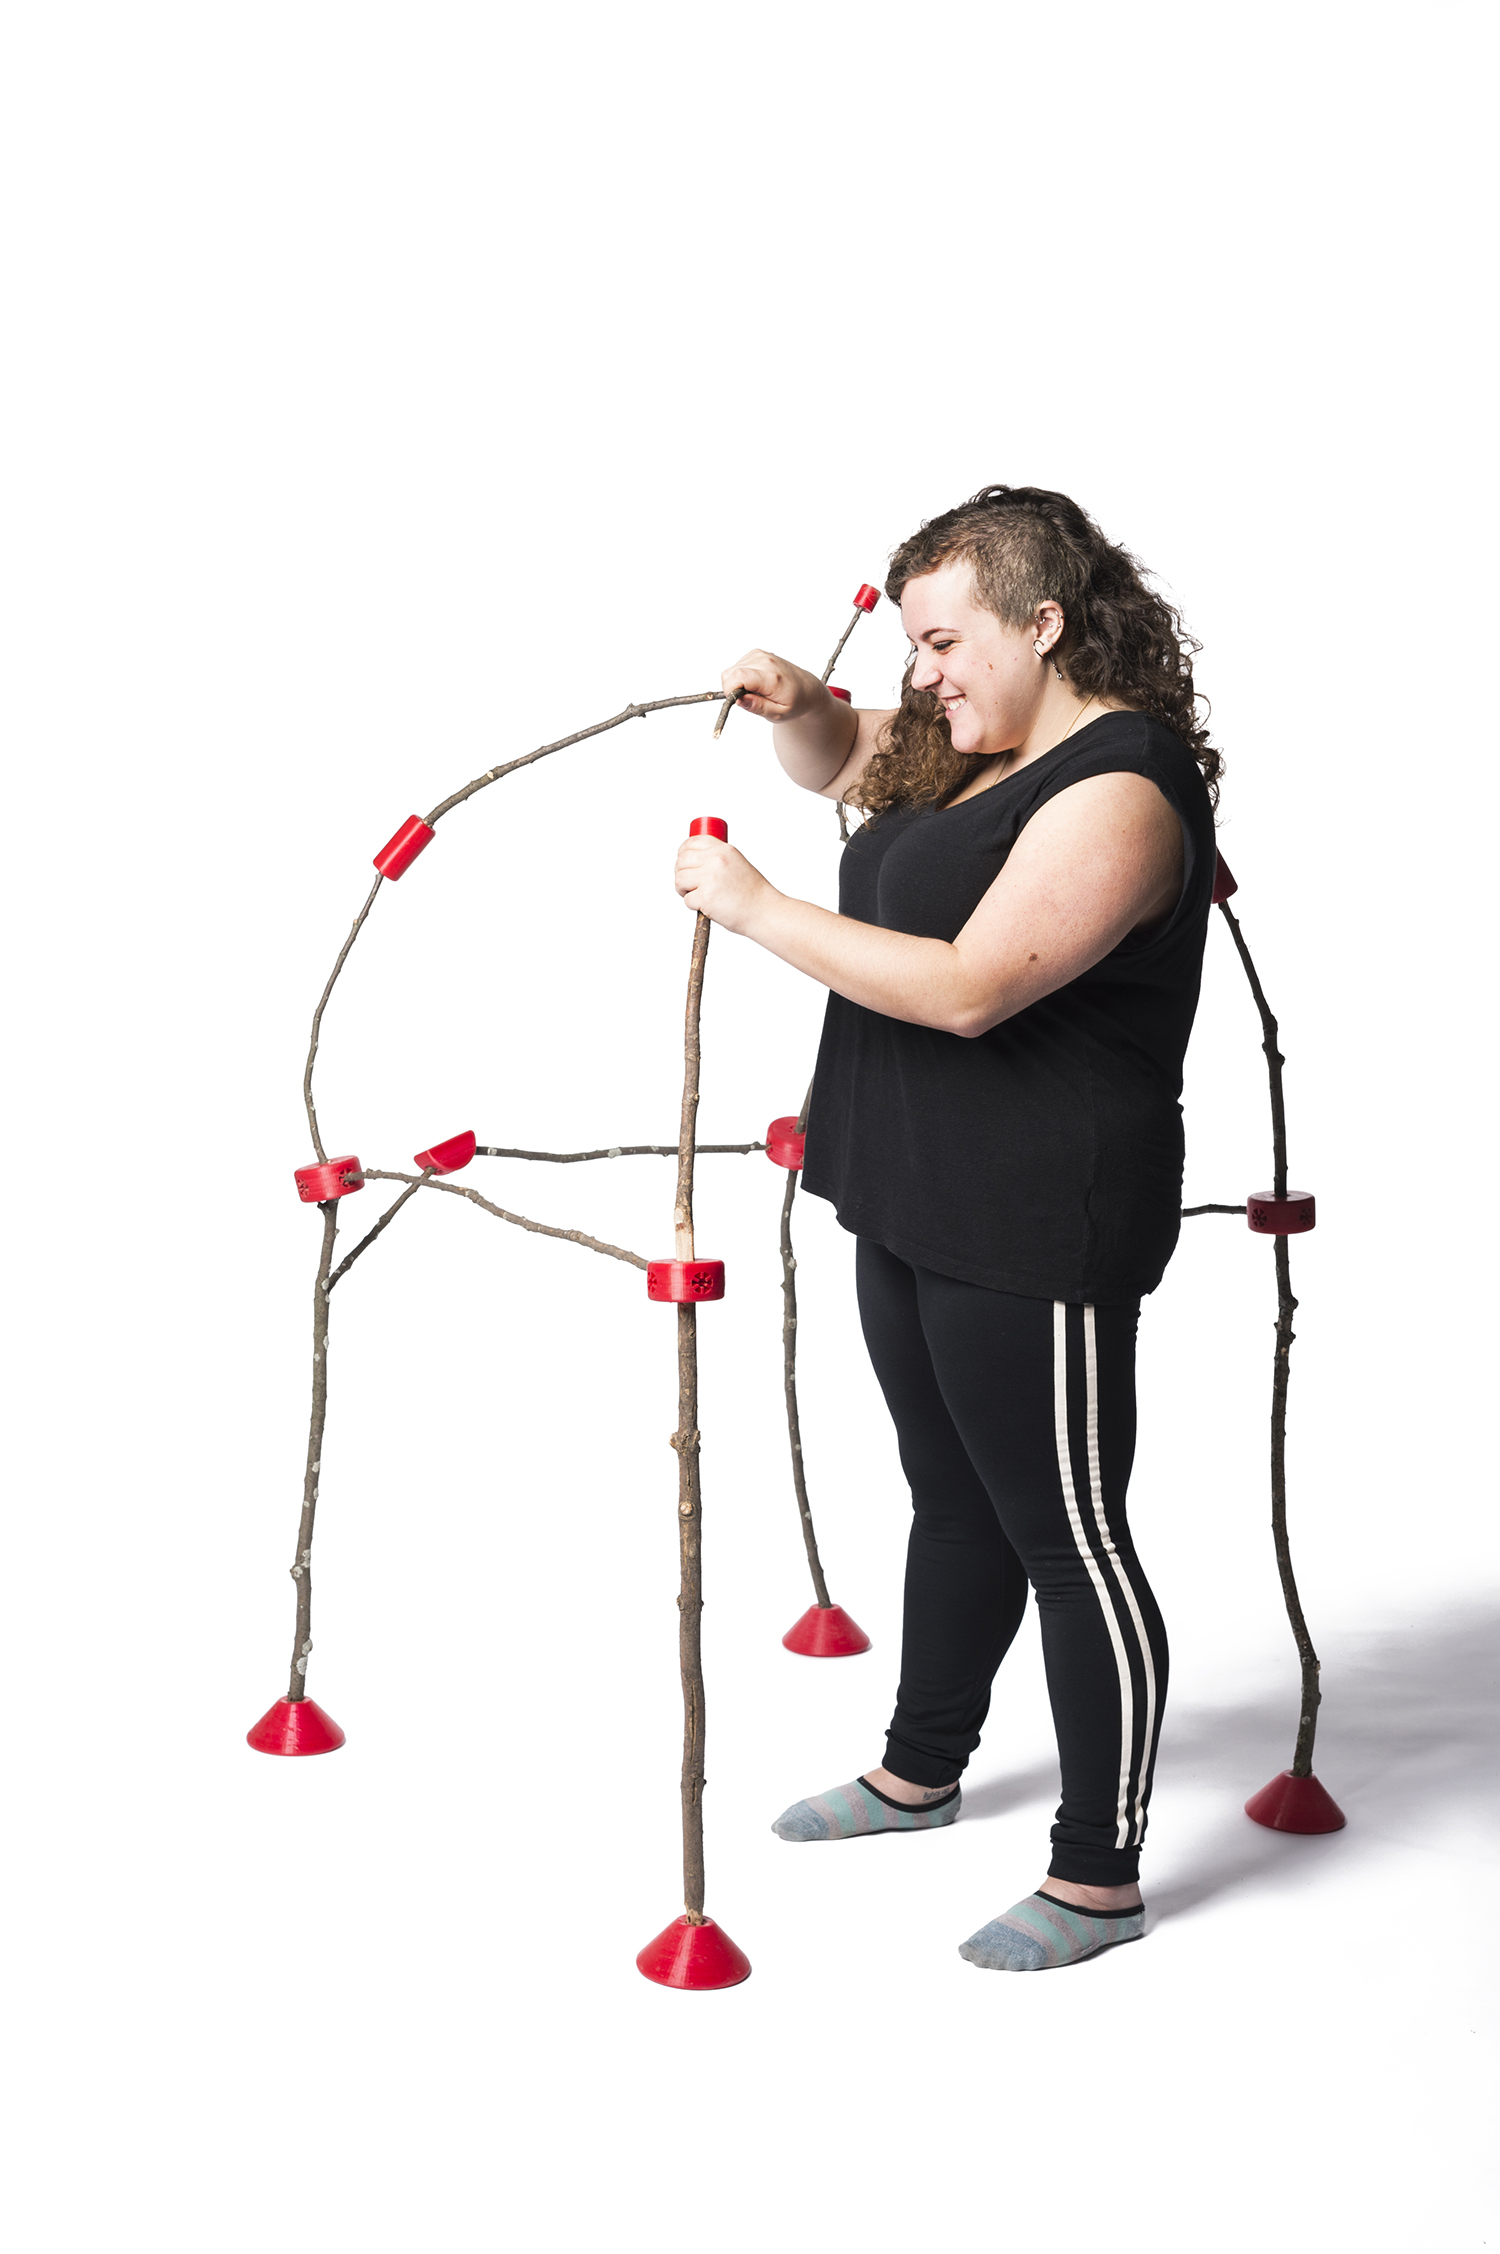 A toy comprised of a system of connected sticks